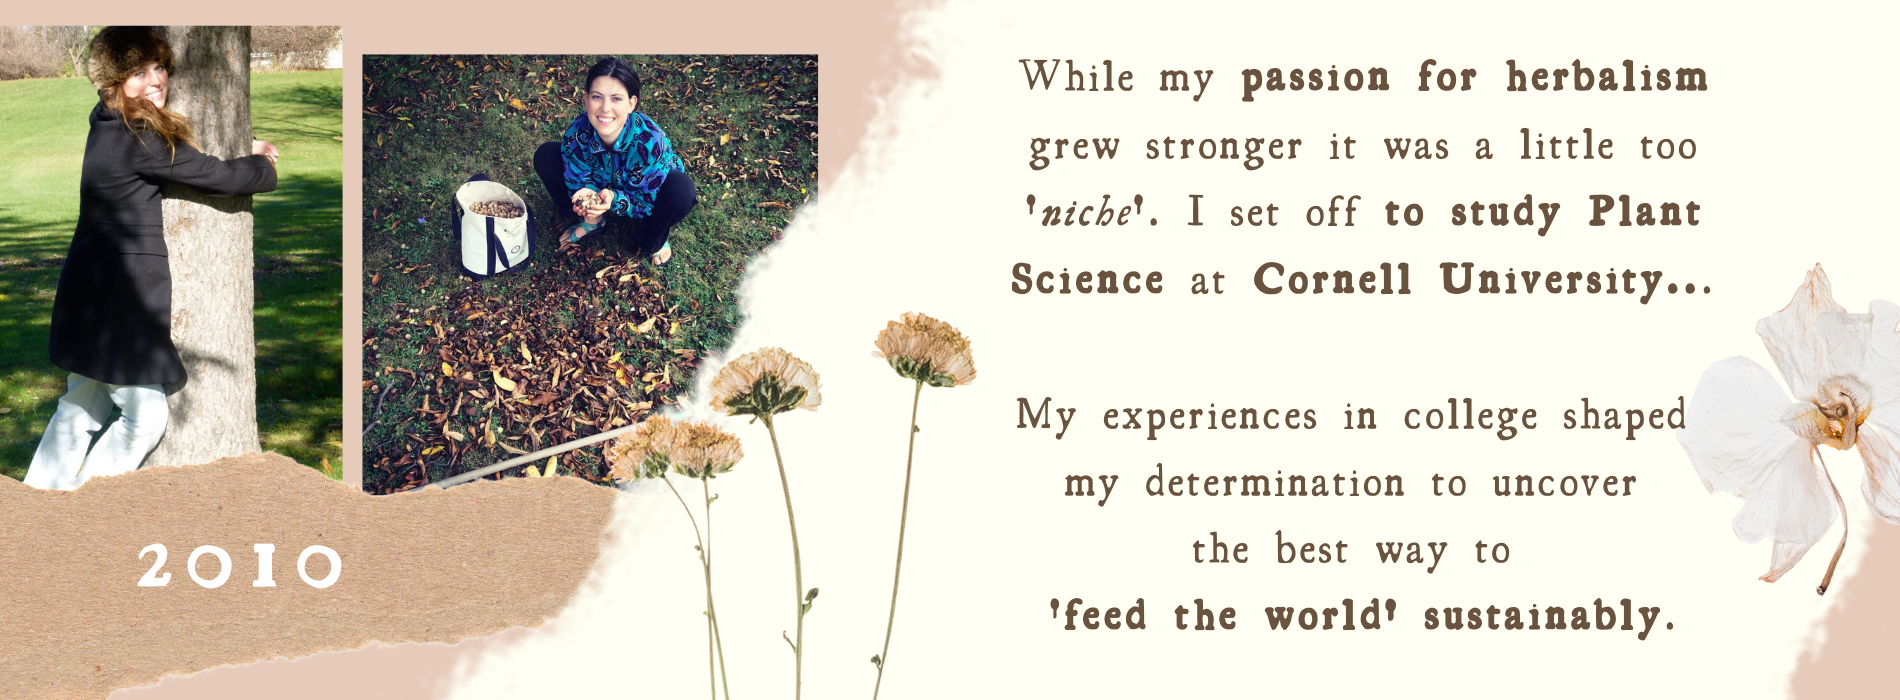 While my passion for herbalism grew stronger it was a little too 'niche'. I set off to study Plant Science at Cornell University...   My experiences in college shaped  my determination to uncover  the best way to  'feed the world' sustainably.